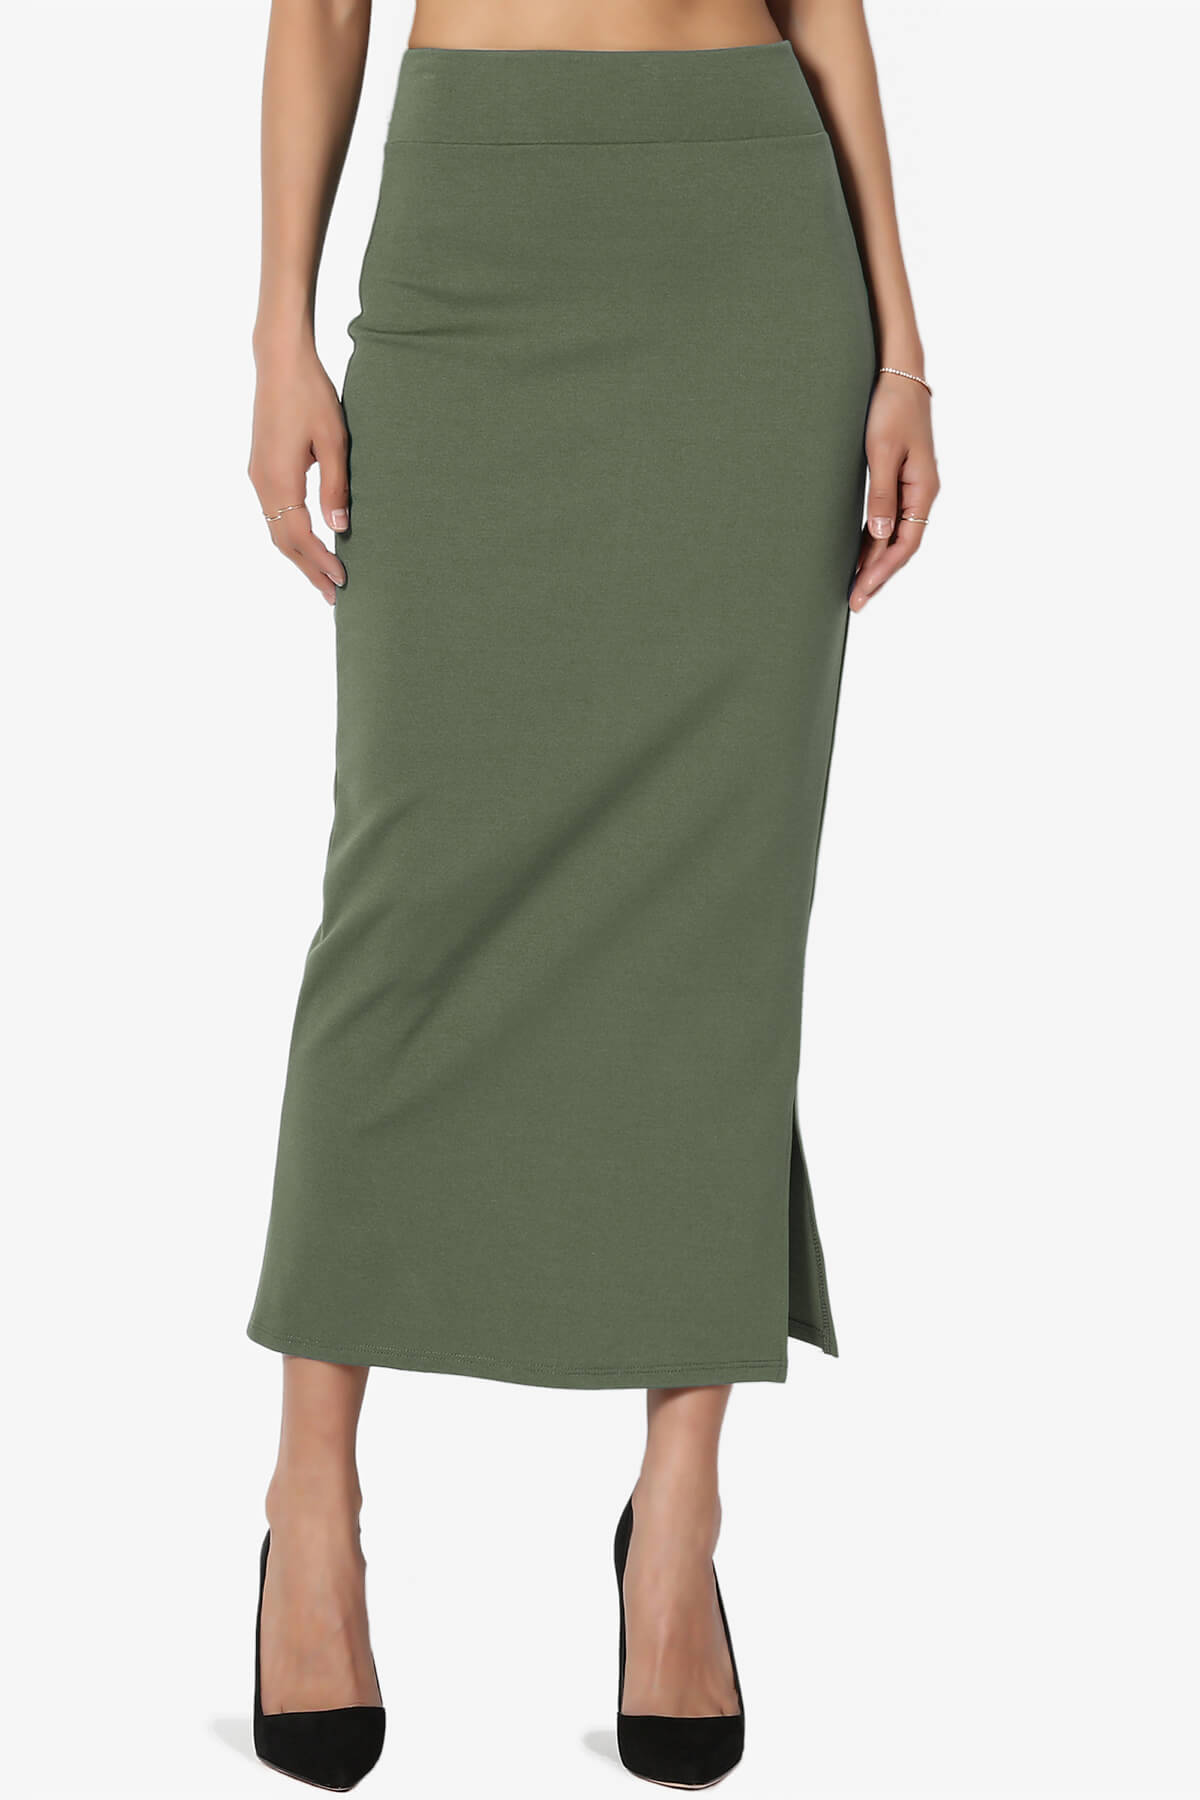 Load image into Gallery viewer, Carleta Mid Calf Pencil Skirt DUSTY OLIVE_1
